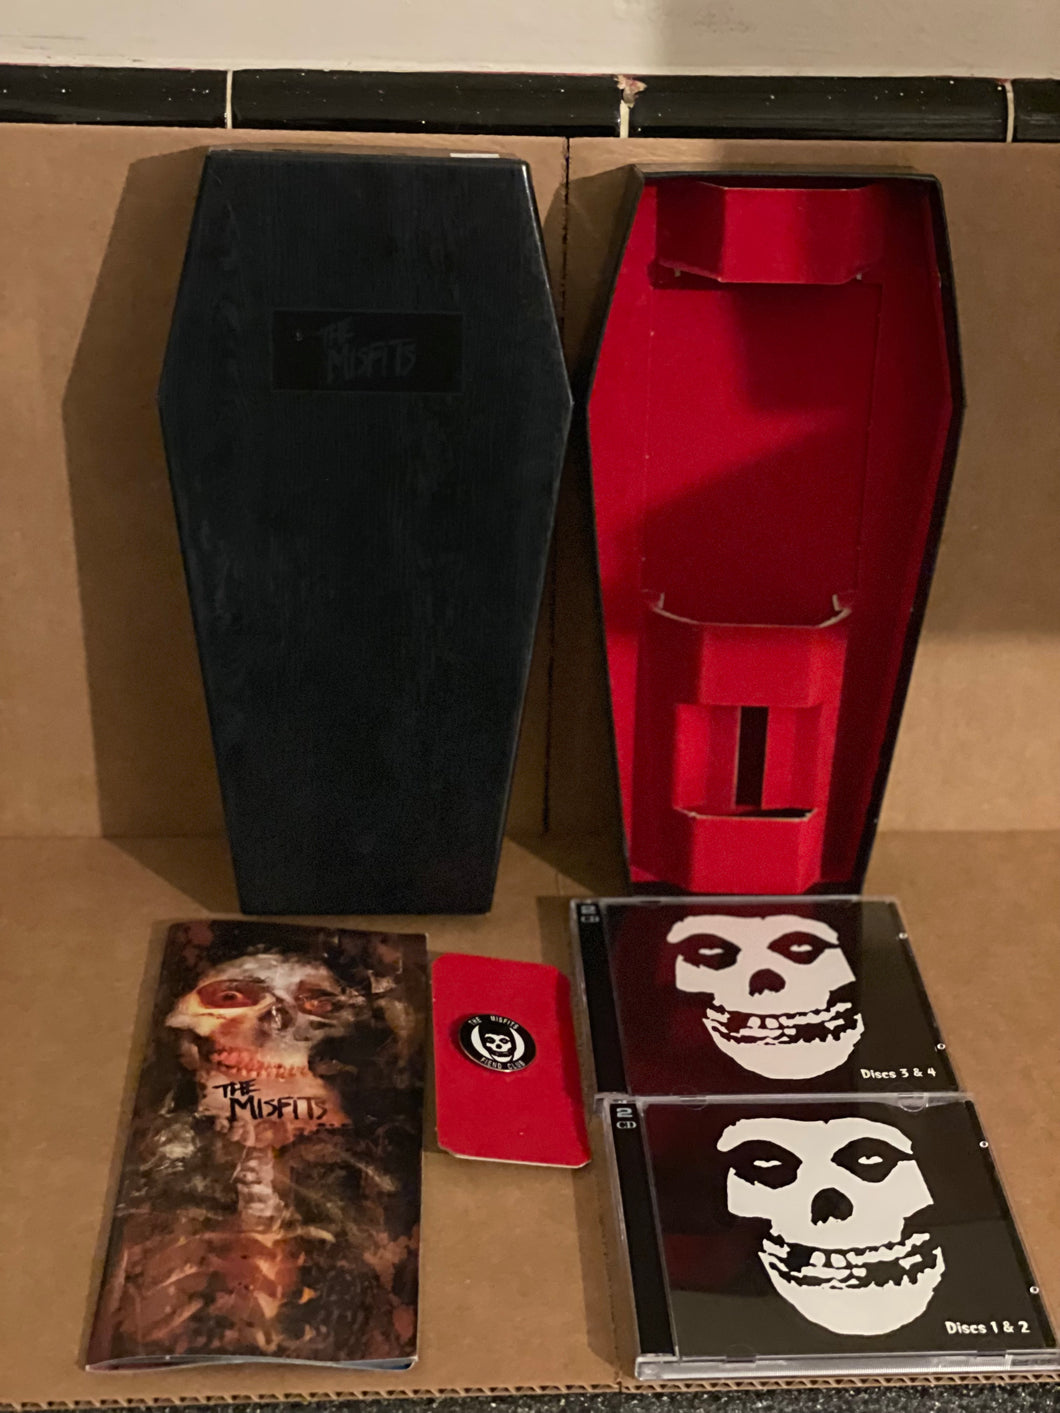 Misfits Coffin 4xCD Box Set 2nd Pressing With Fiend Club Pin 1996 Danzig